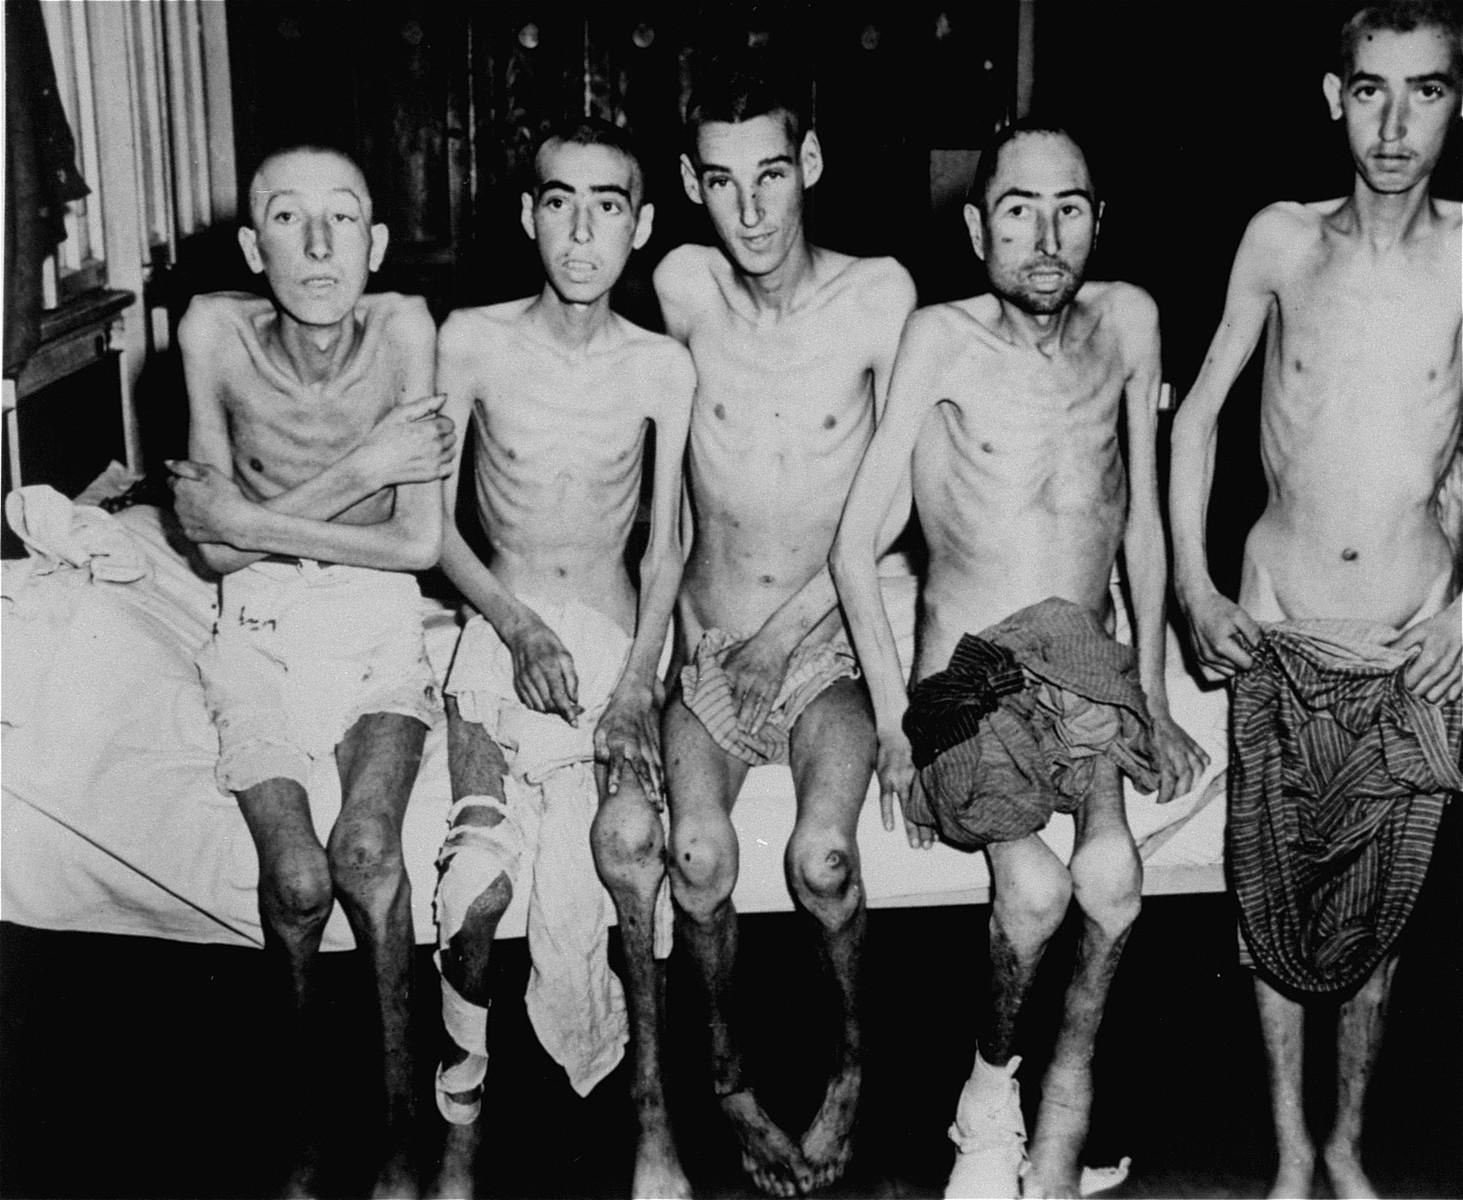 Group portrait of emaciated survivors in the infirmary of the Dachau concentration camp soon after the liberation.